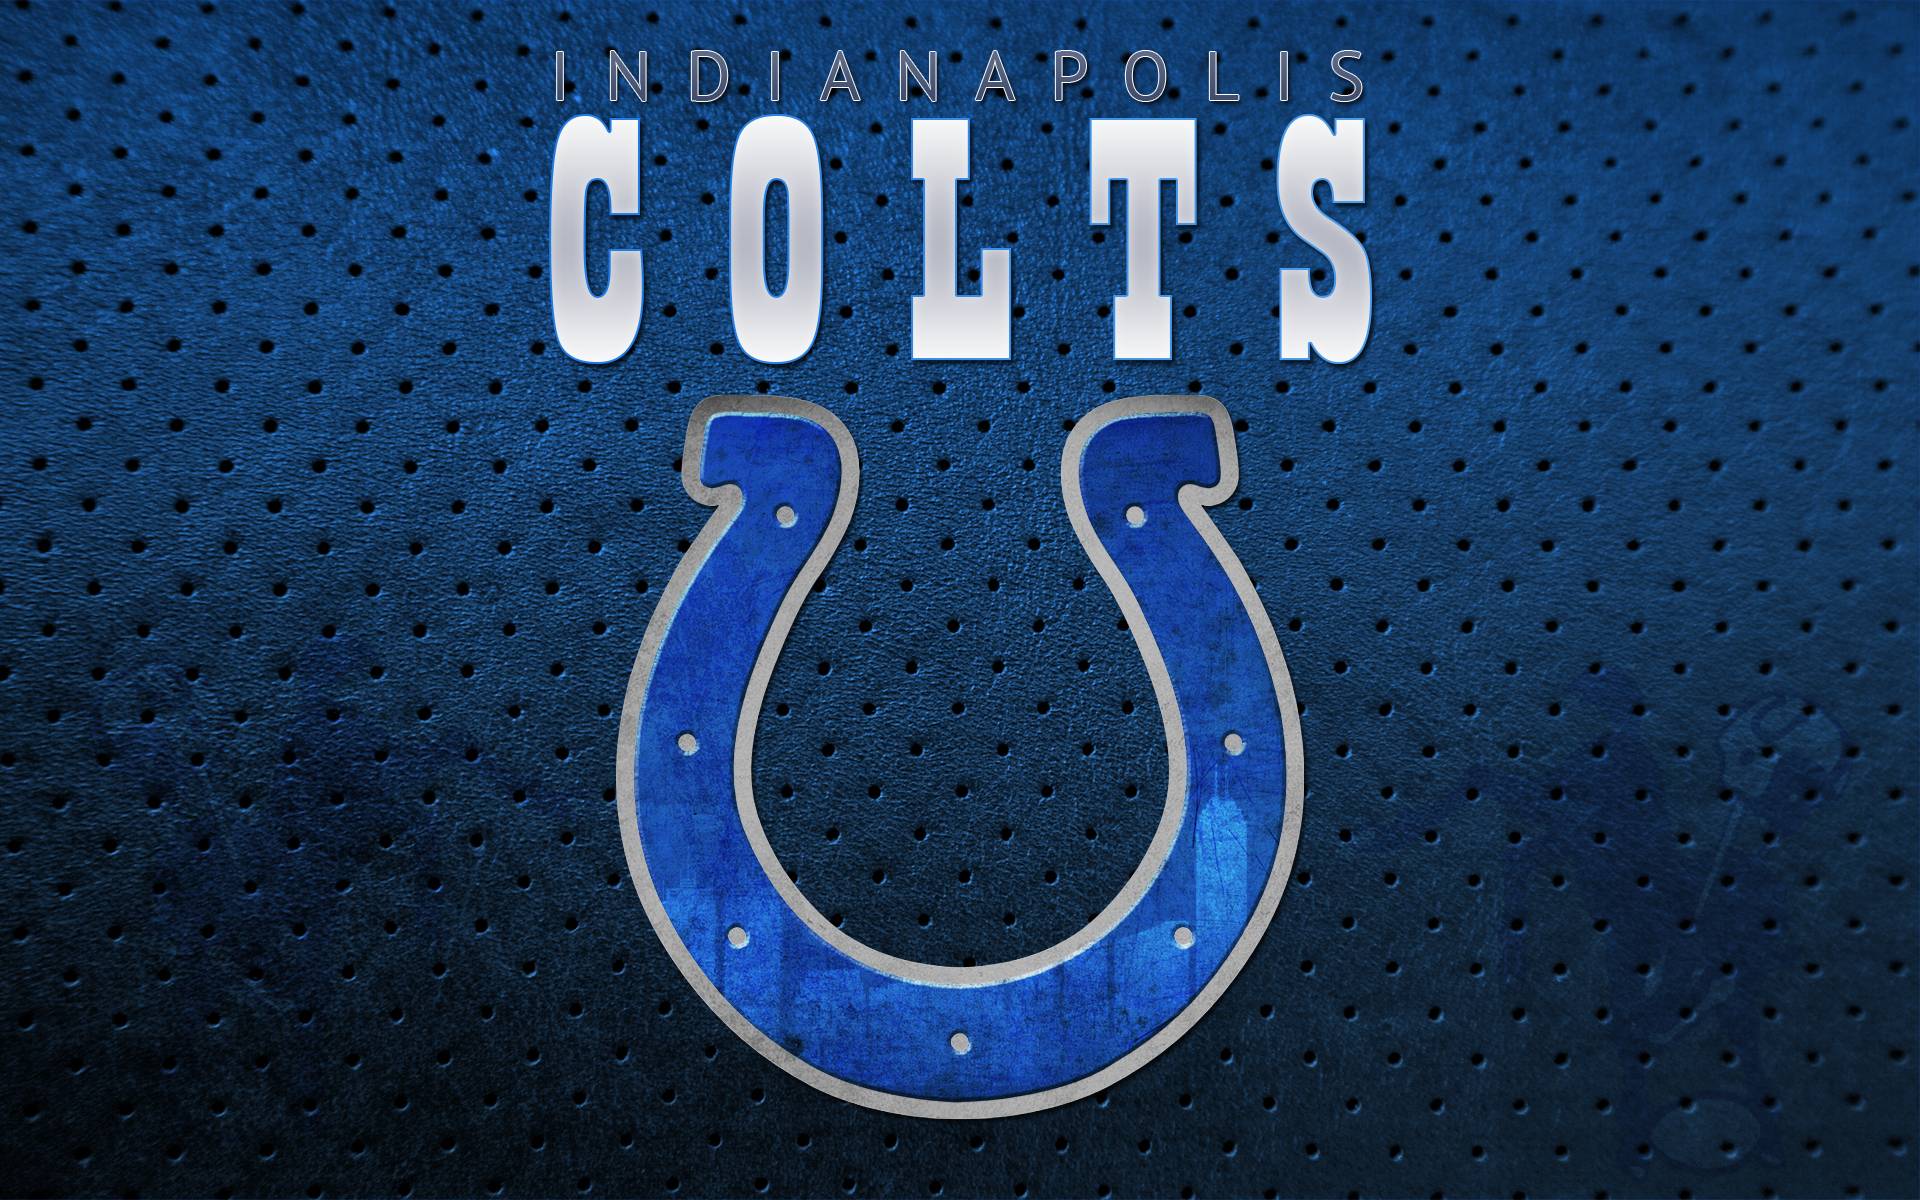 Indianapolis Colts Logo Wallpapers NFL / Wallpapers Sport 74320 high